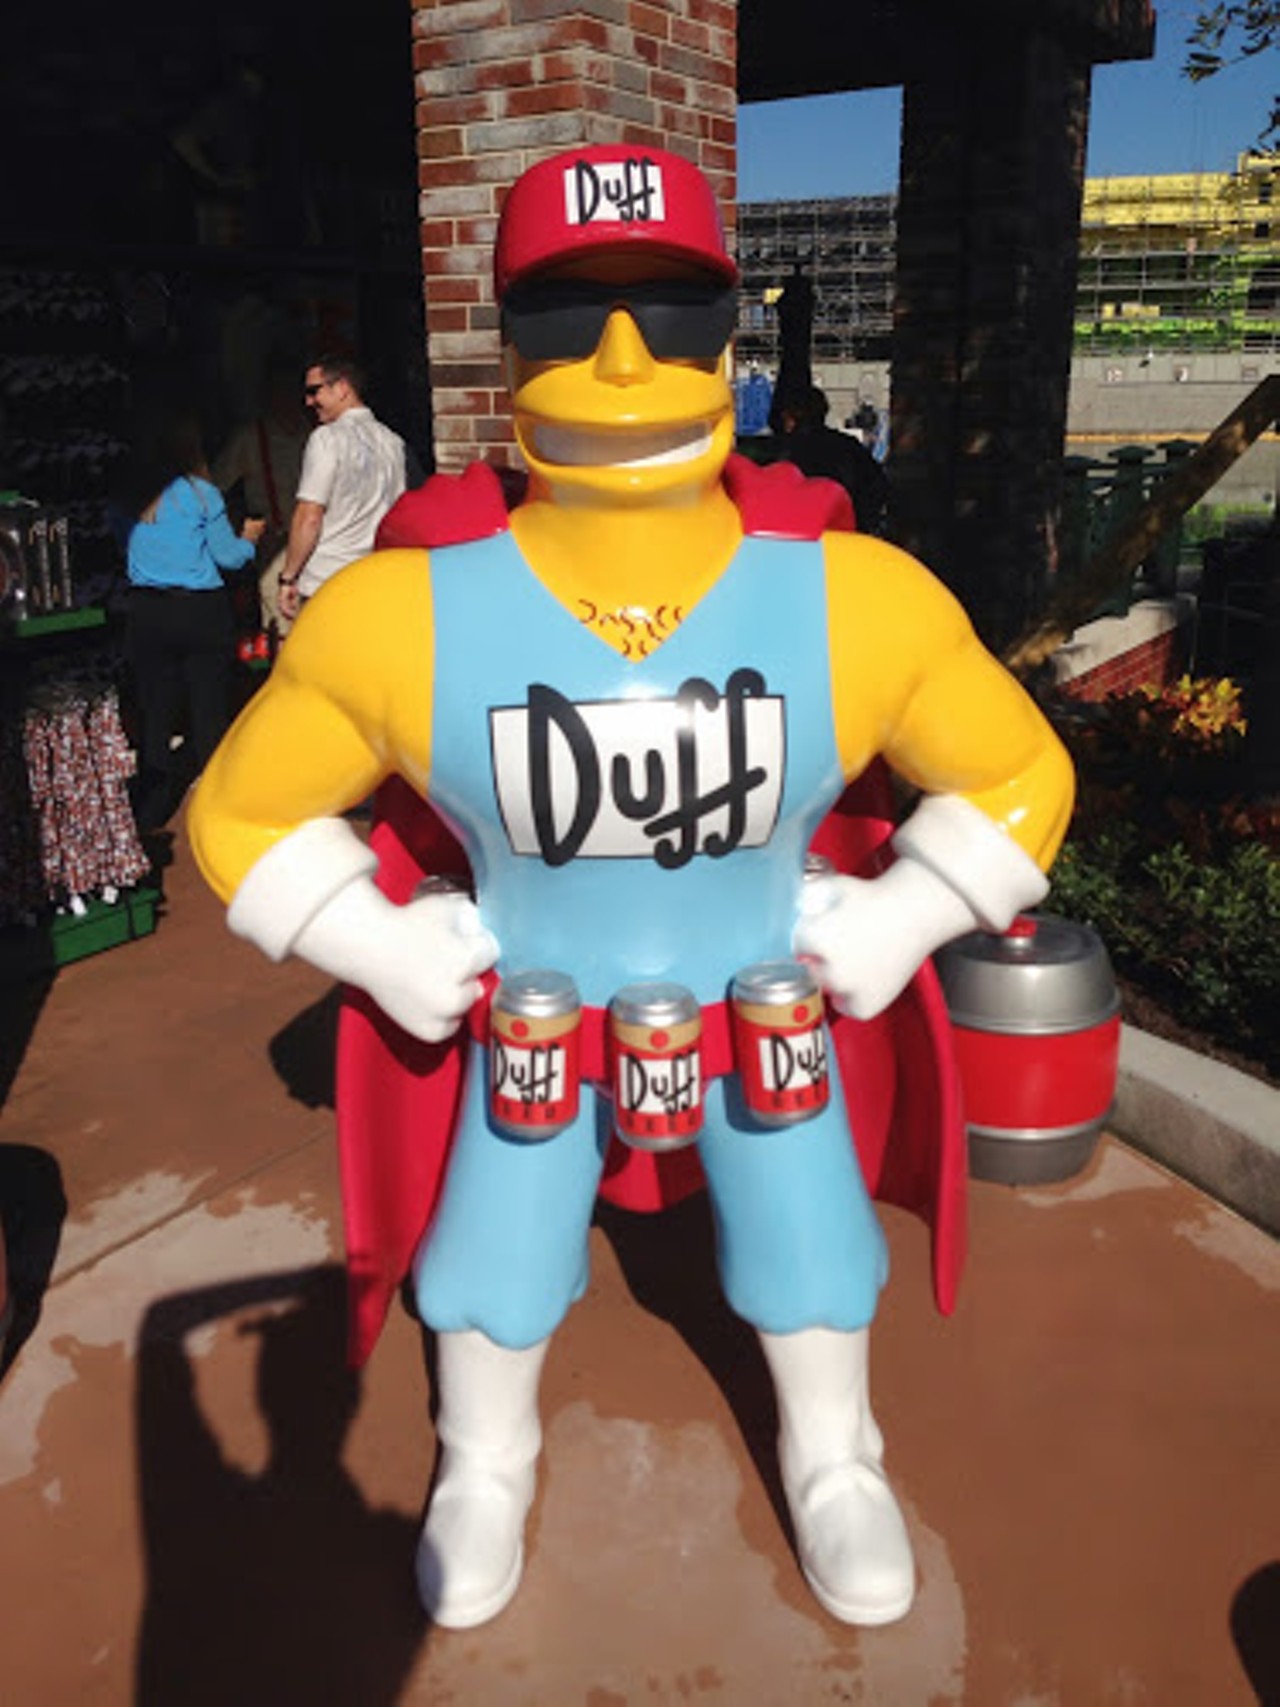 Duffman is in the house!